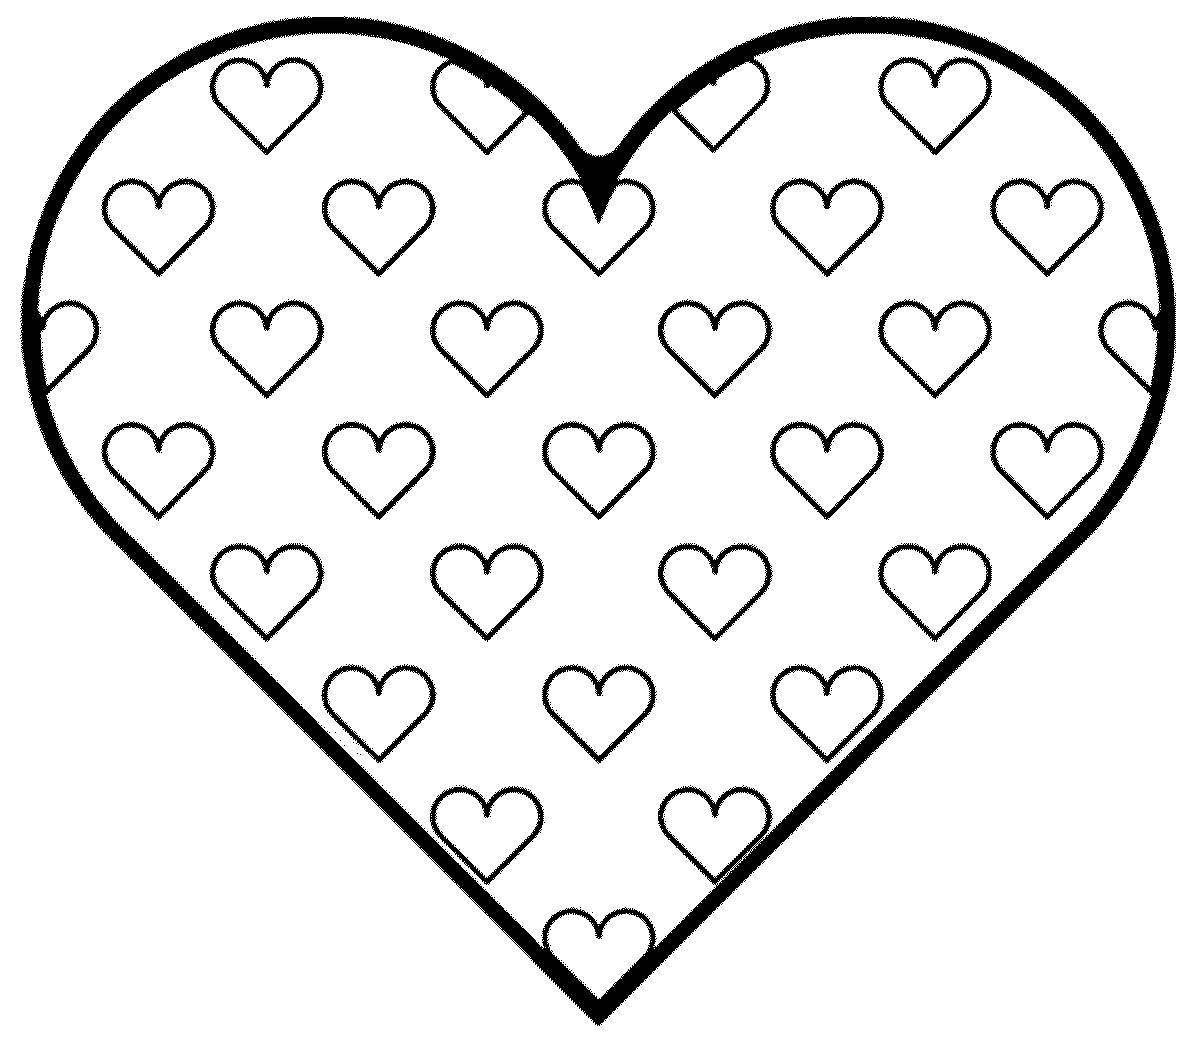 Coloring page unusual little hearts